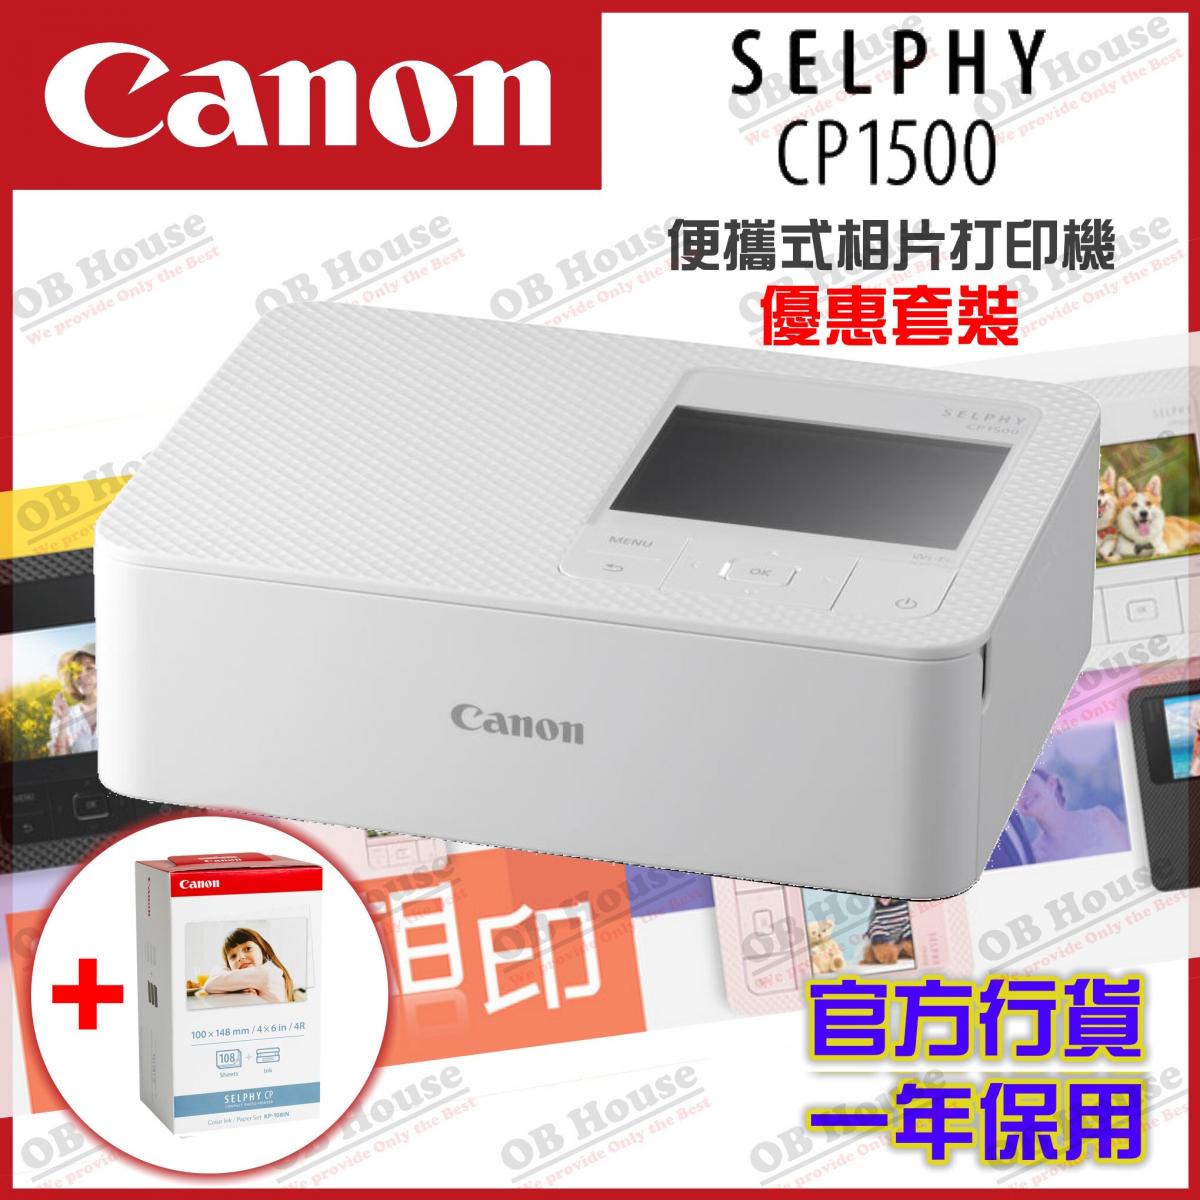 [VALUE PACK] SELPHY CP1500 - White - Compact Photo Printer (5540C005AA02)